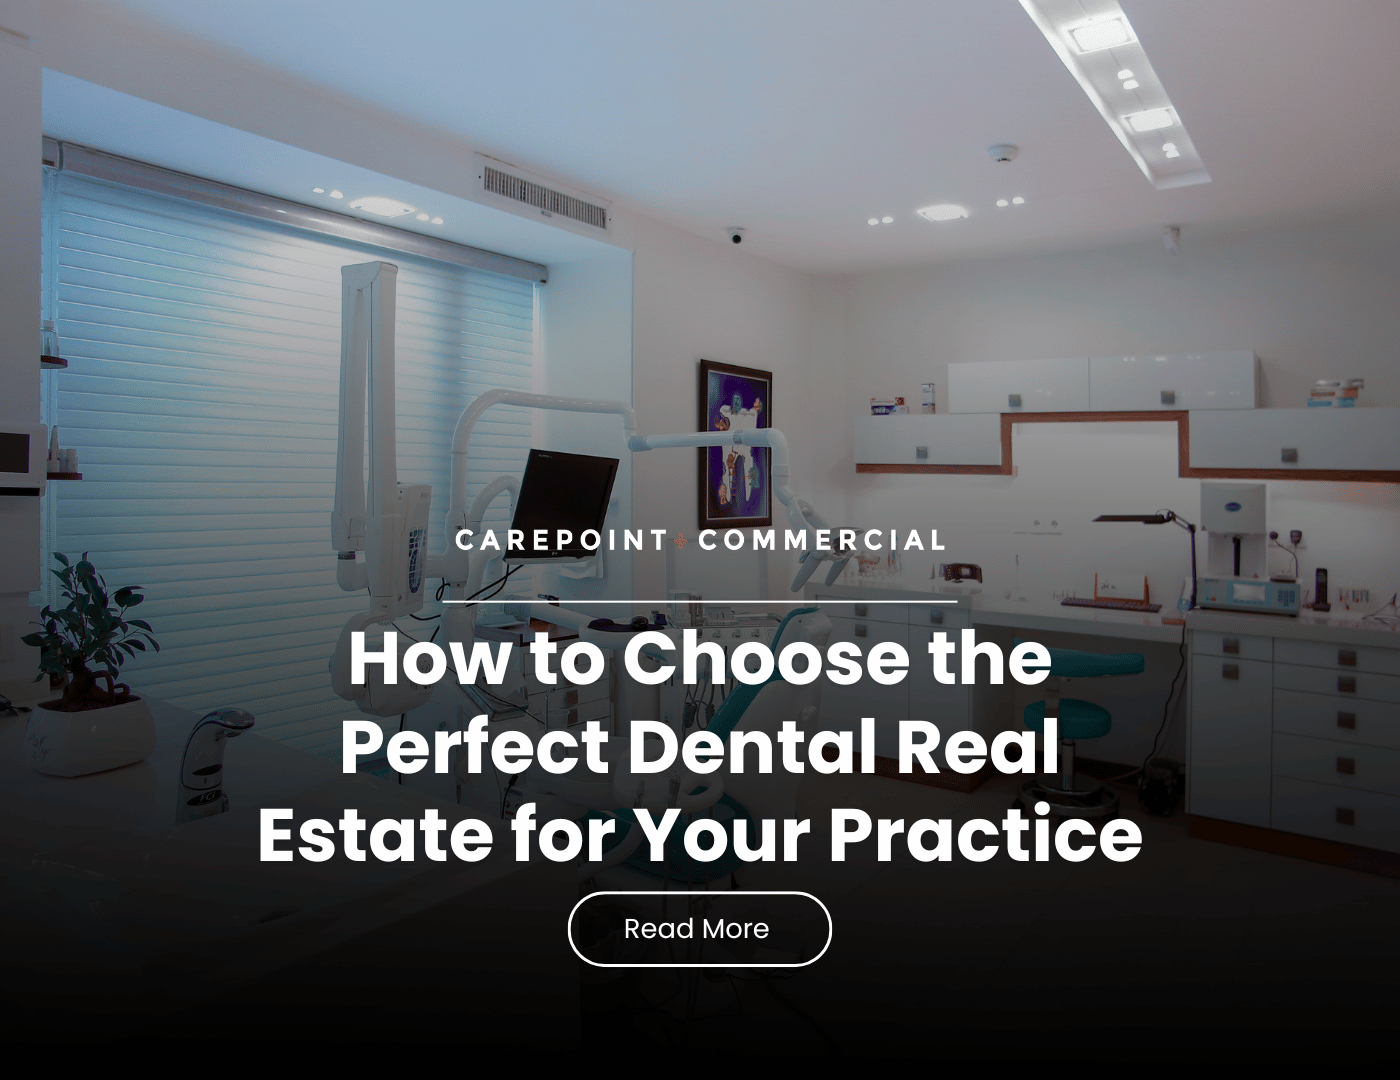 How to Choose the Perfect Dental Real Estate for Your Dental Practice: A Comprehensive Guide